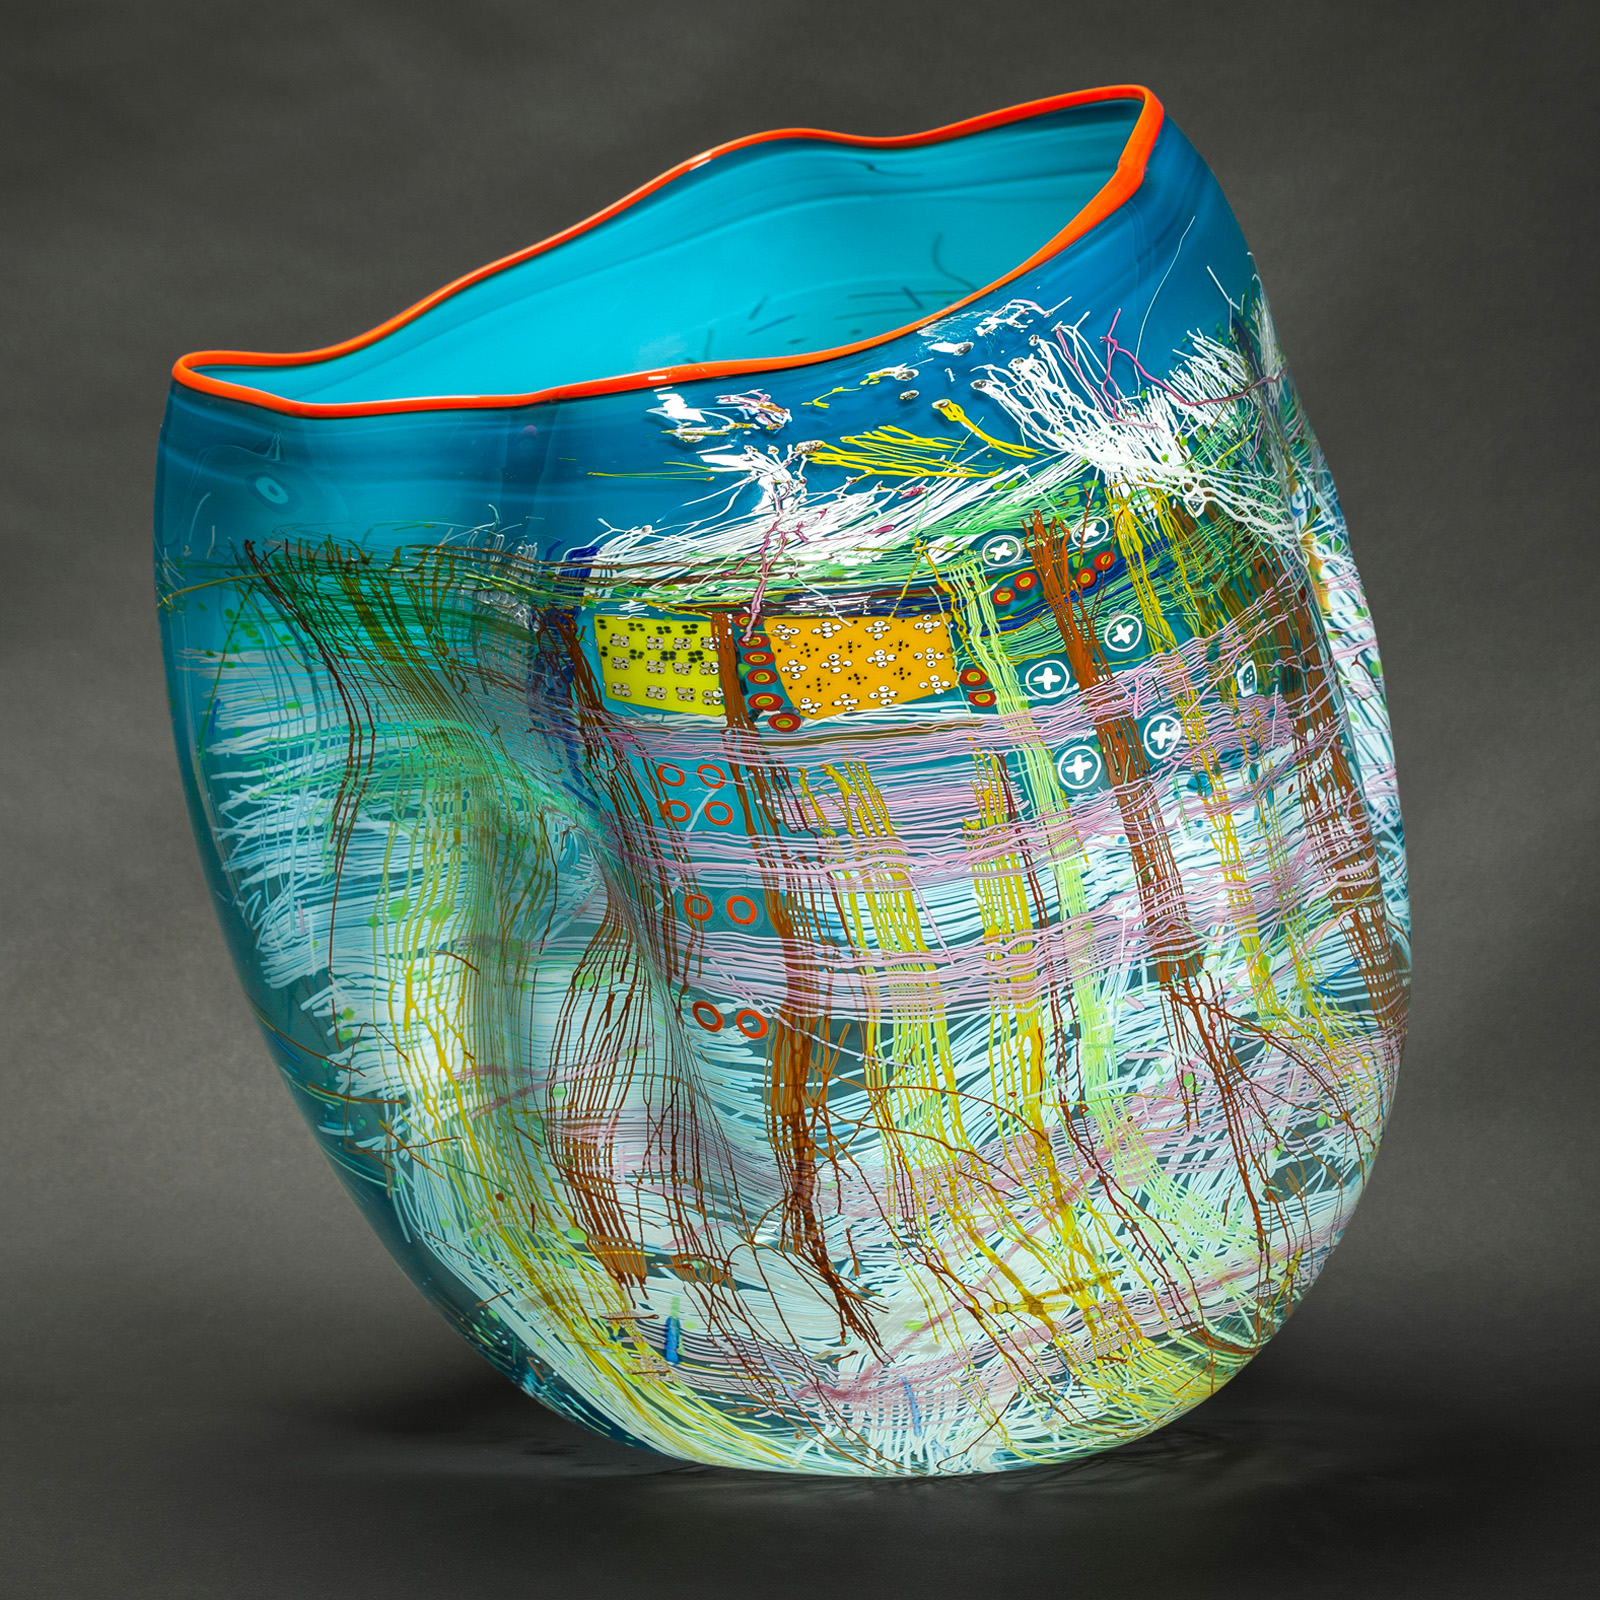 Dale Chihuly, Cerulean Blue Soft Cylinder with Coral Red Lip Wrap, 2014